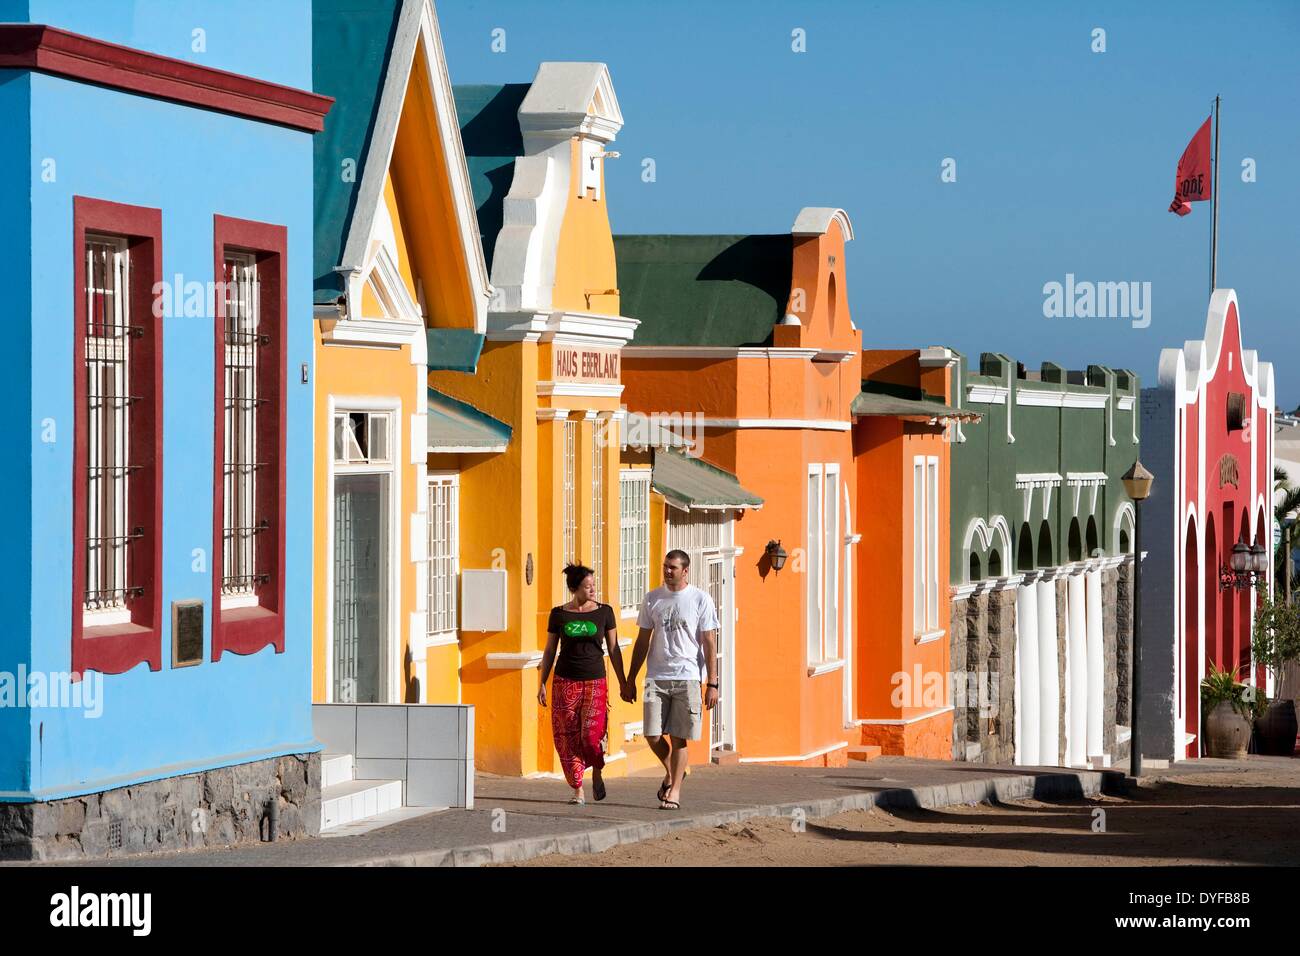 Colourful fassades of houses along a street in Luederitz in the south of Namibia, 10 January 2011. The town was founded by tobacco traders from Bremen in Germany. Photo: Tom Schulze -NO WIRE SERVICE – Stock Photo